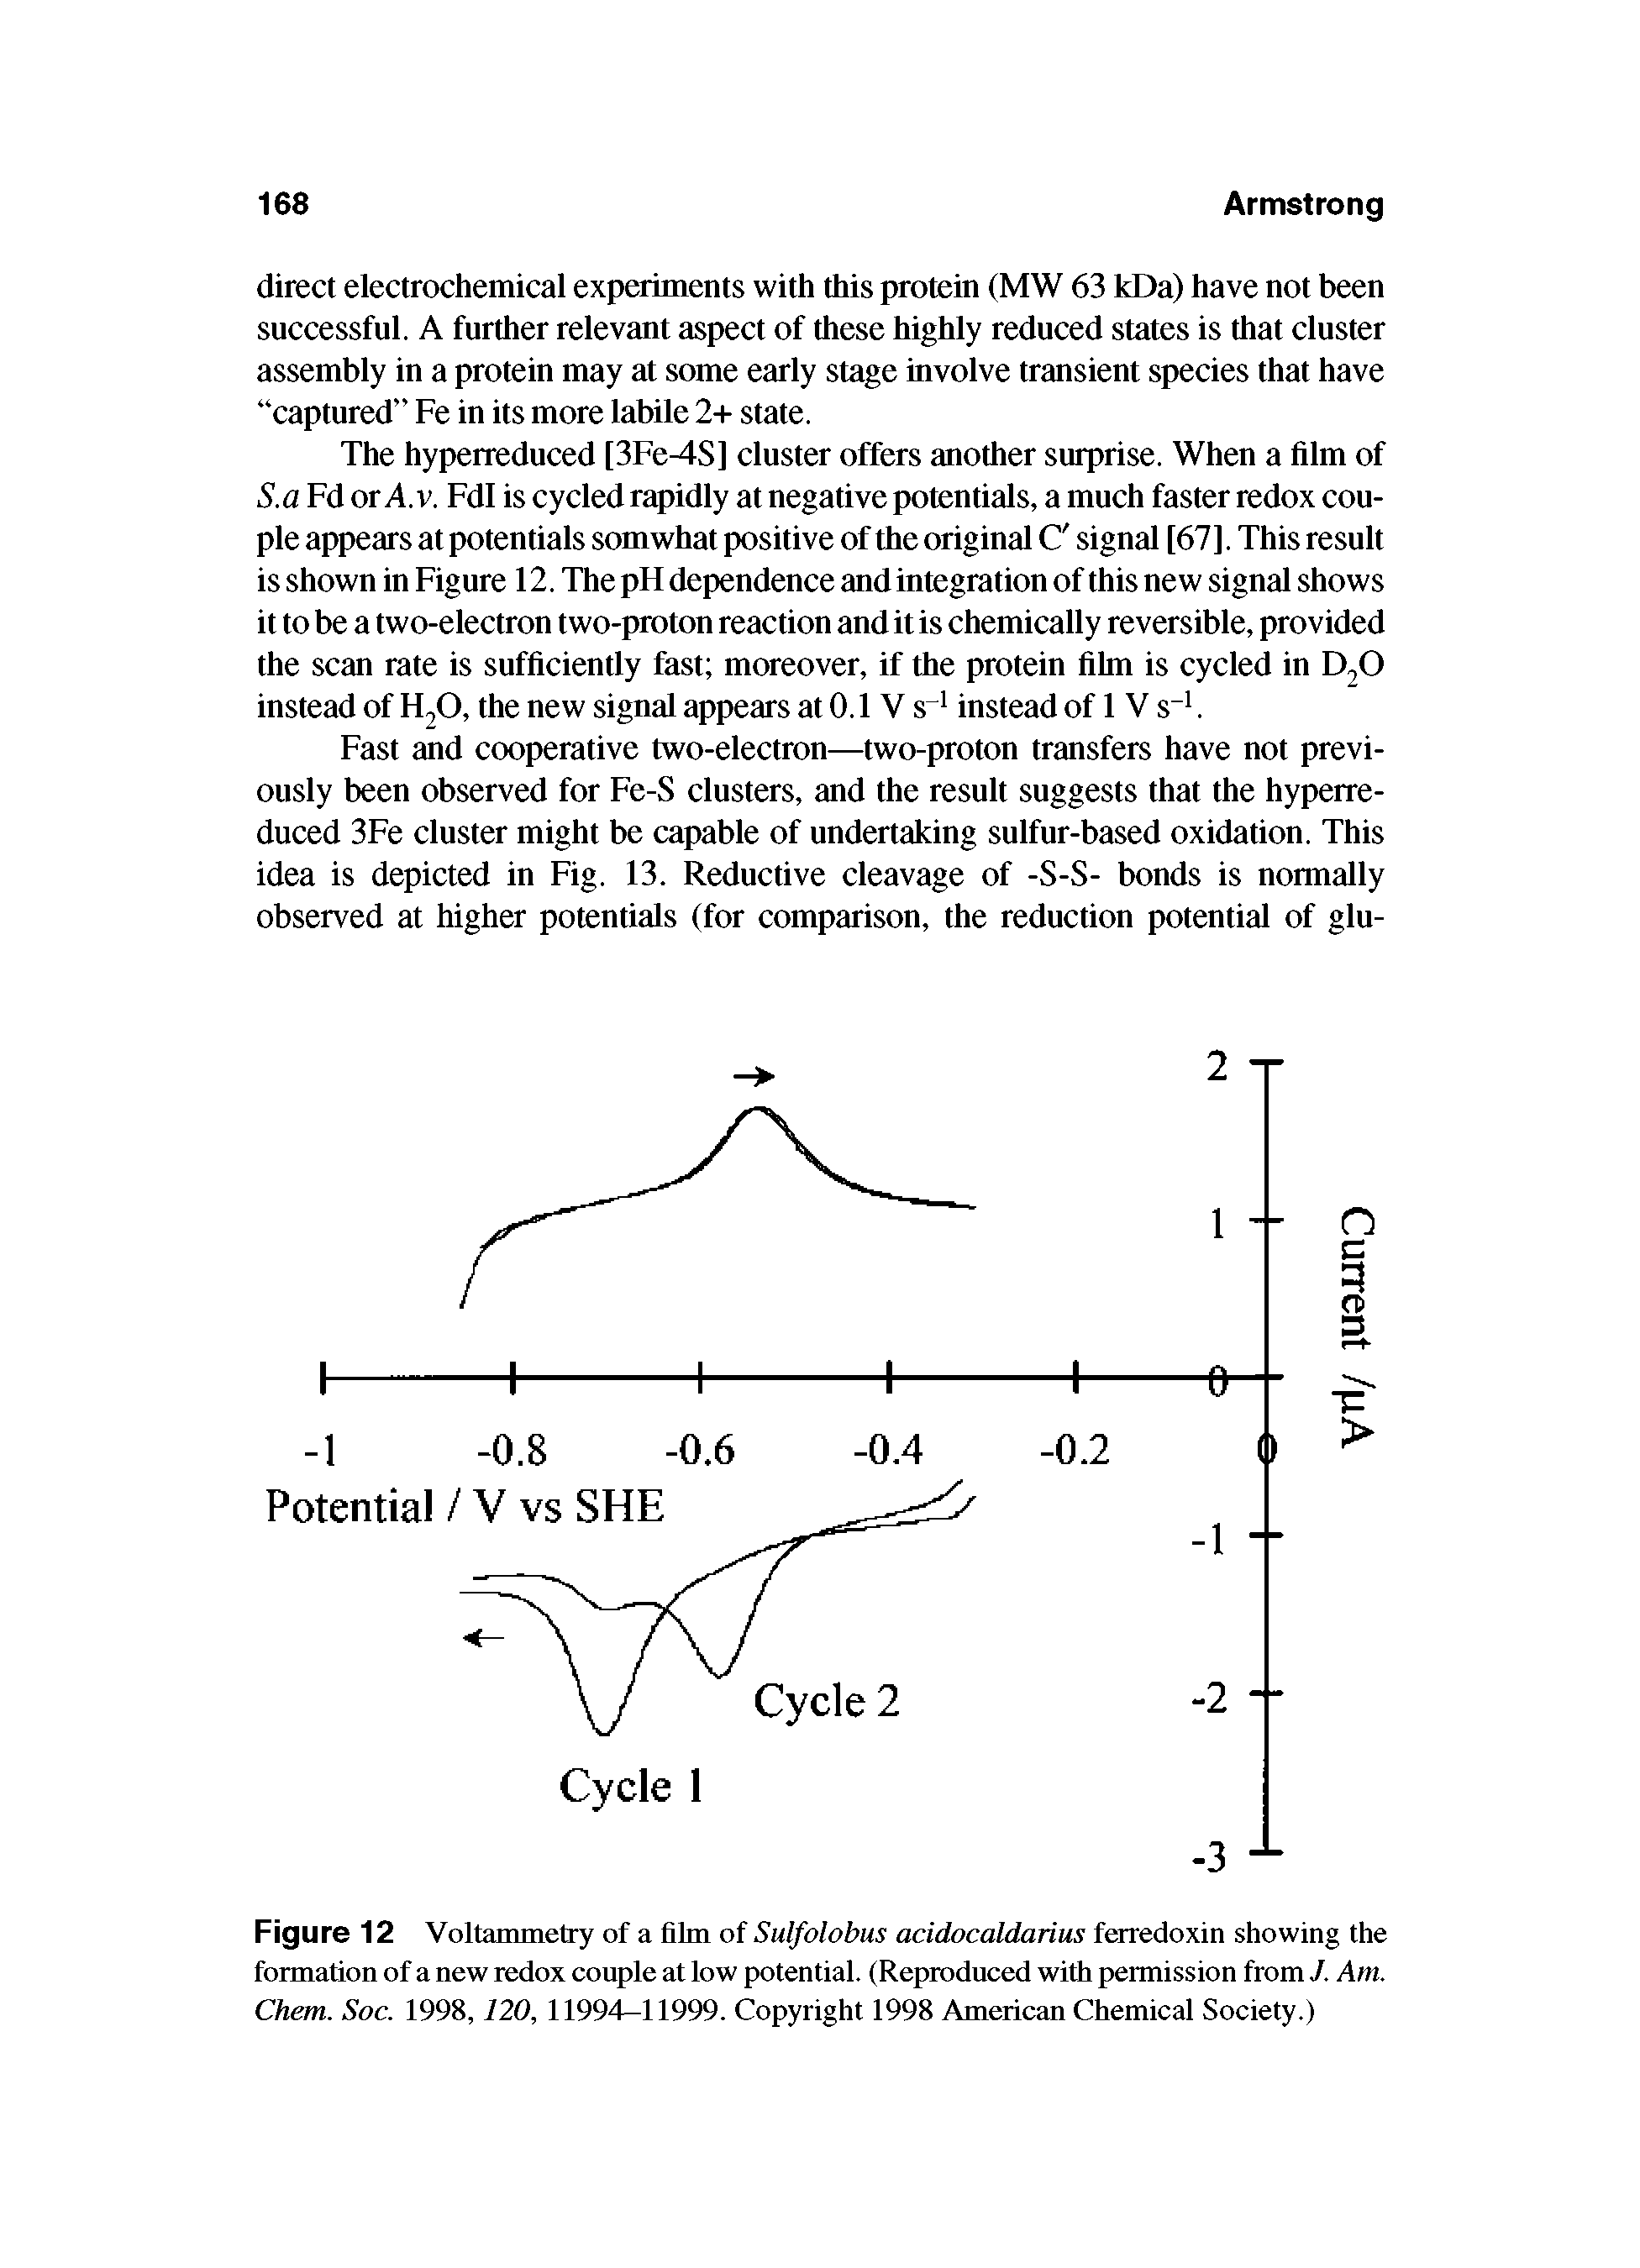 Figure 12 Voltammetry of a film of Sulfolobus acidocaldarius ferredoxin showing the formation of a new redox couple at low potential. (Reproduced with permission from J. Am. Chem. Soc. 1998,120, 11994—11999. Copyright 1998 American Chemical Society.)...